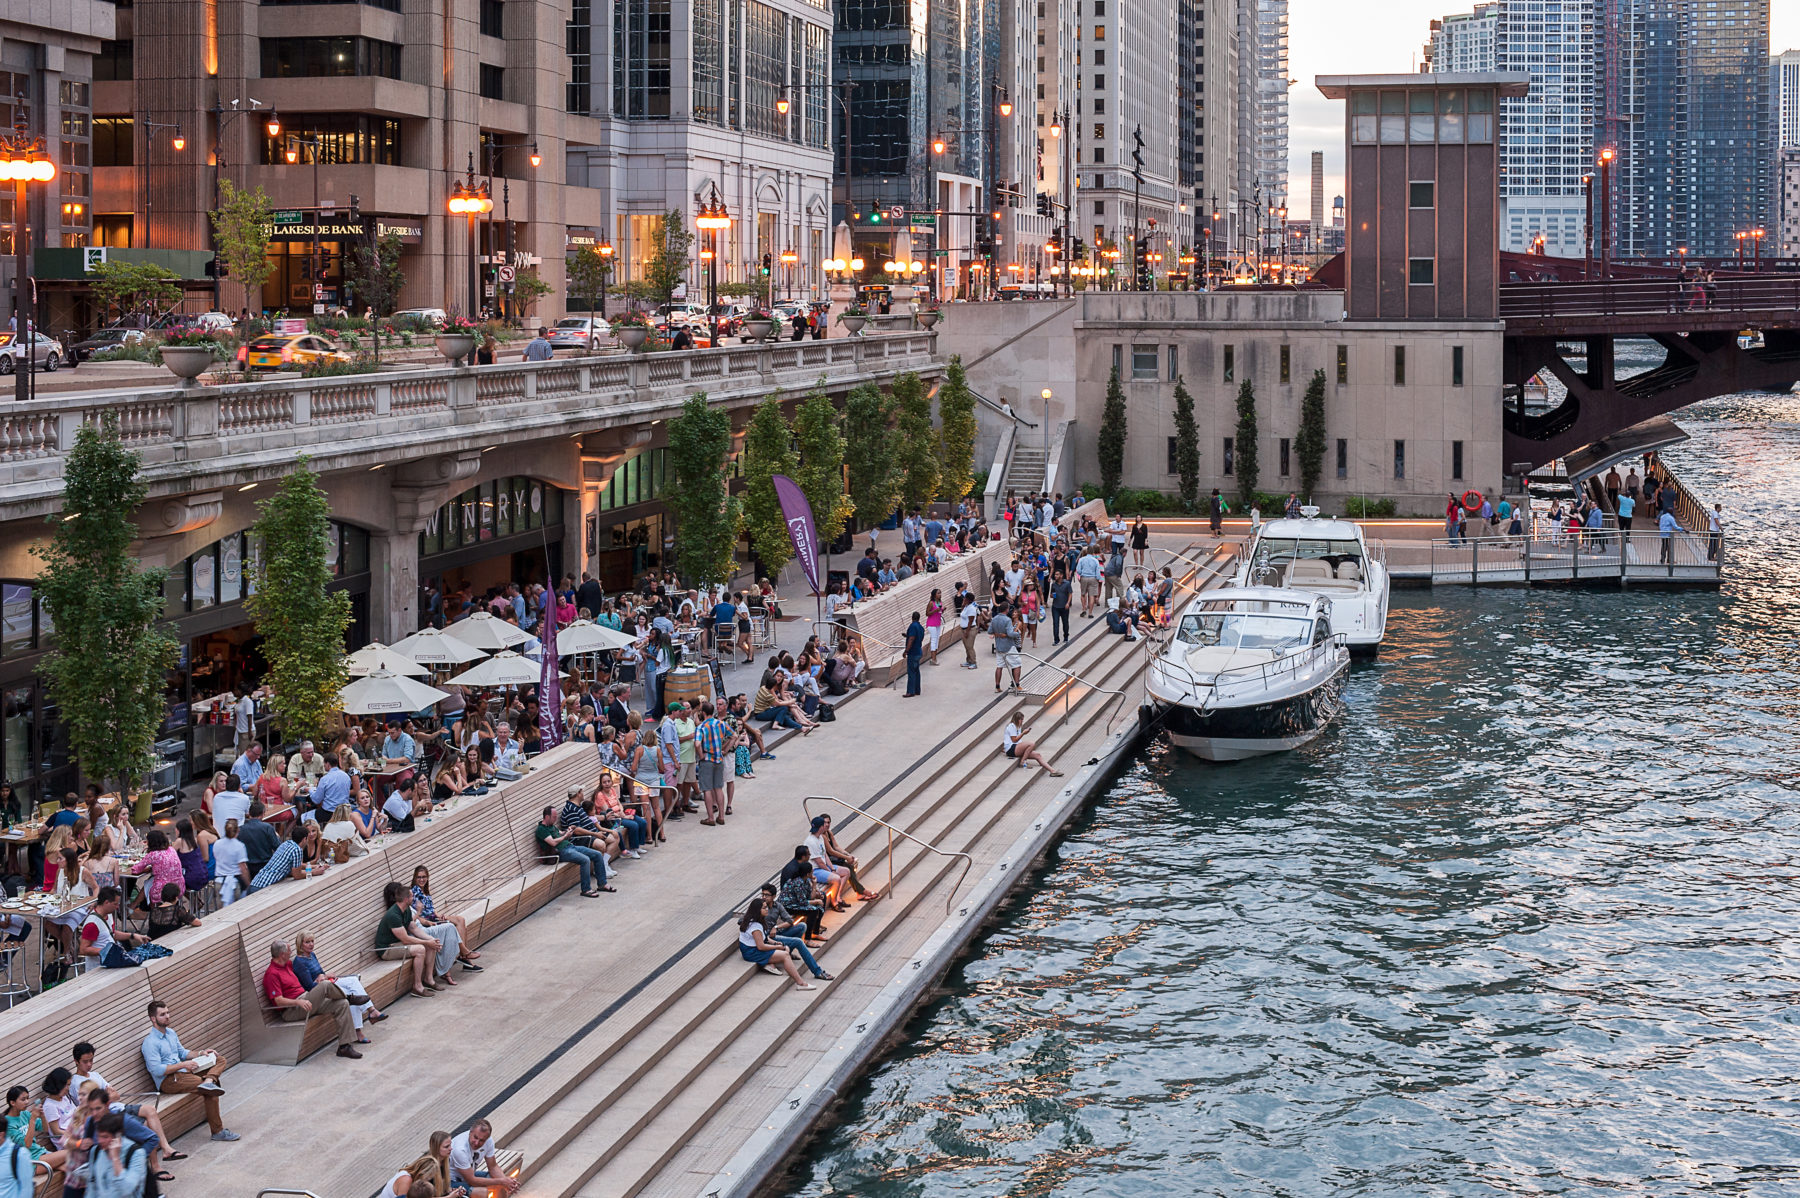 People sitting on stairs in front of Chicago Riverwalk, boats parked alongside them